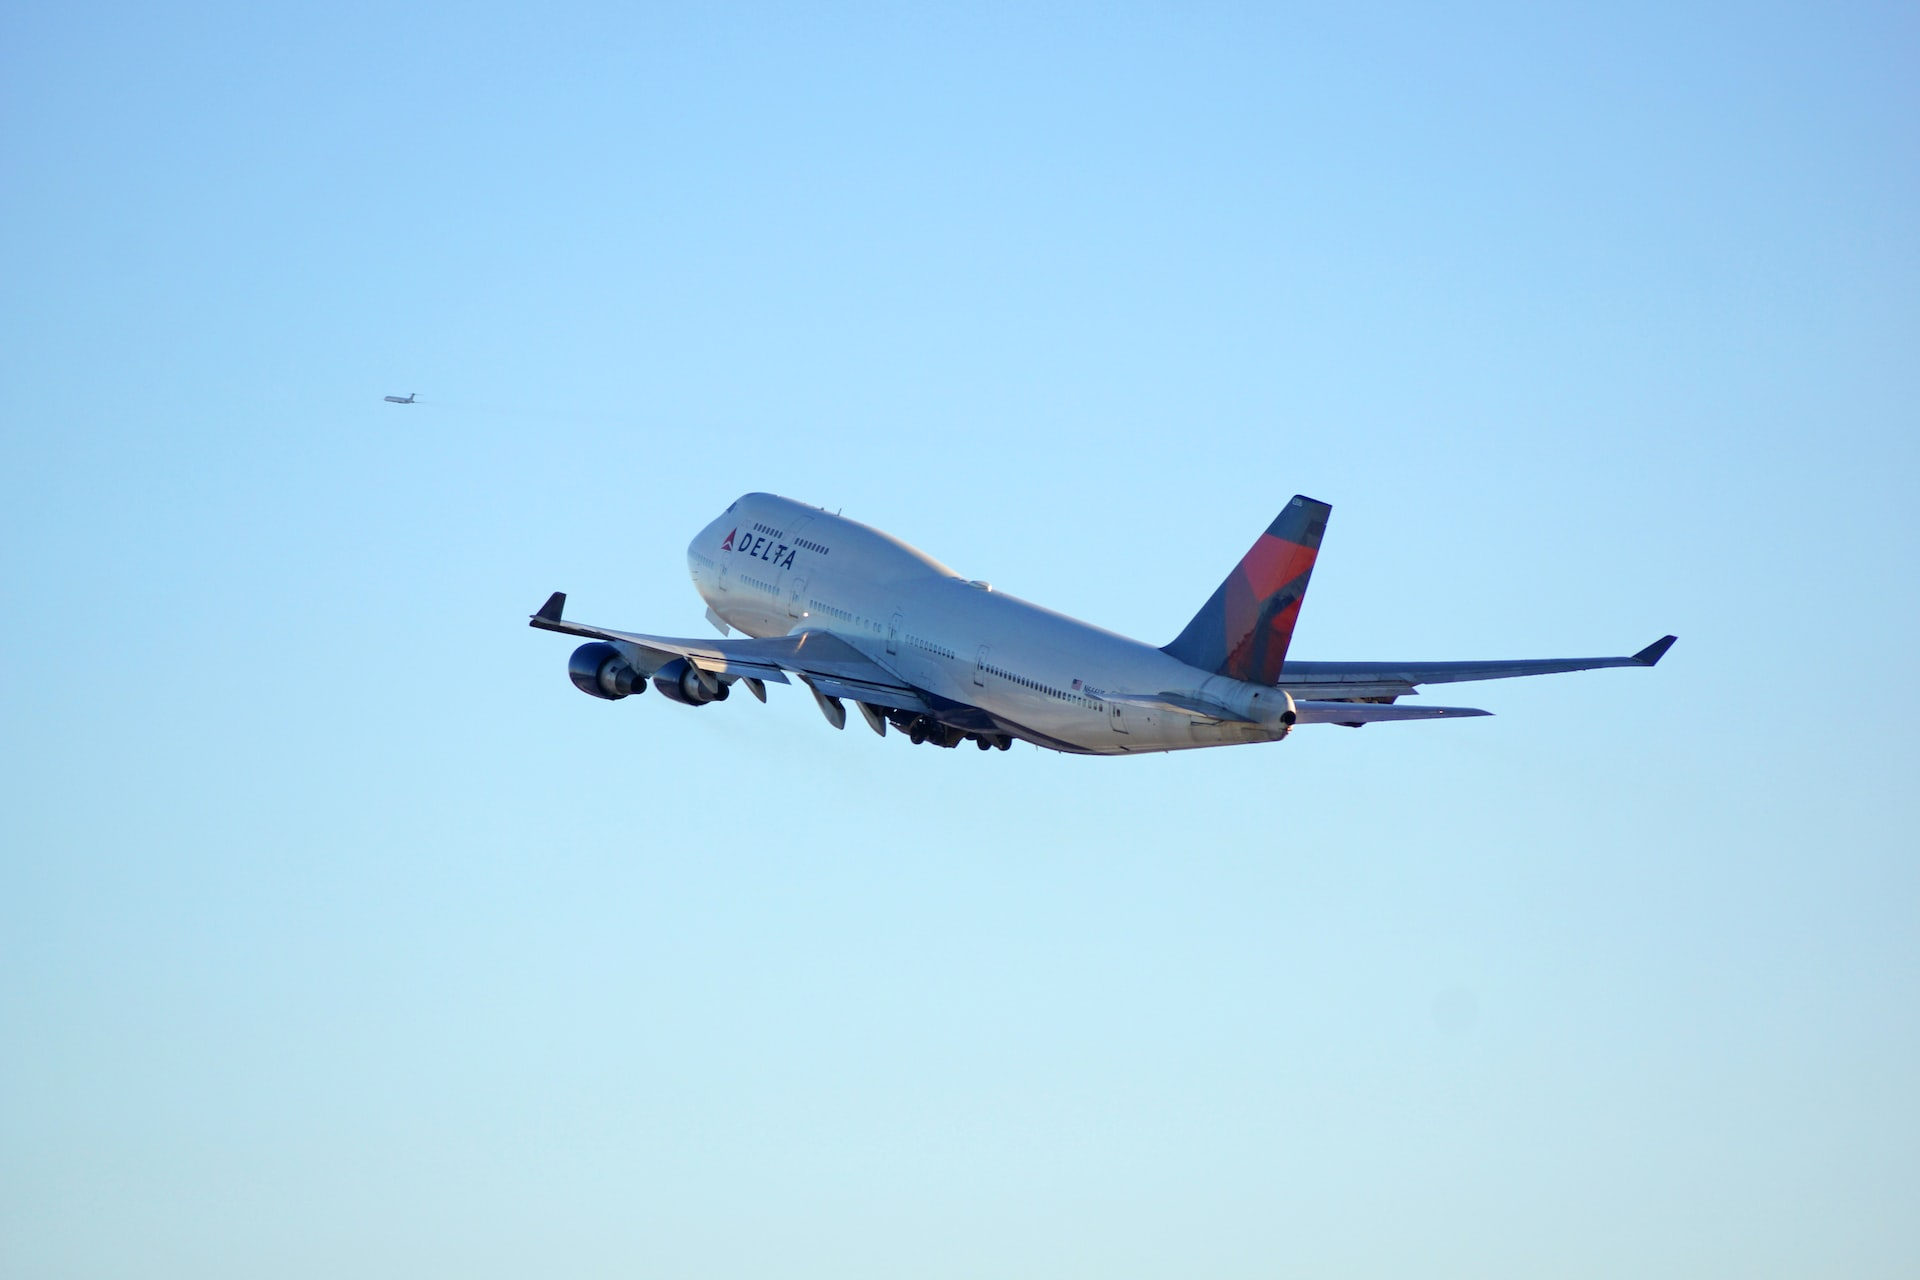 A Boeing 747 aircraft taking off into a clear sky.